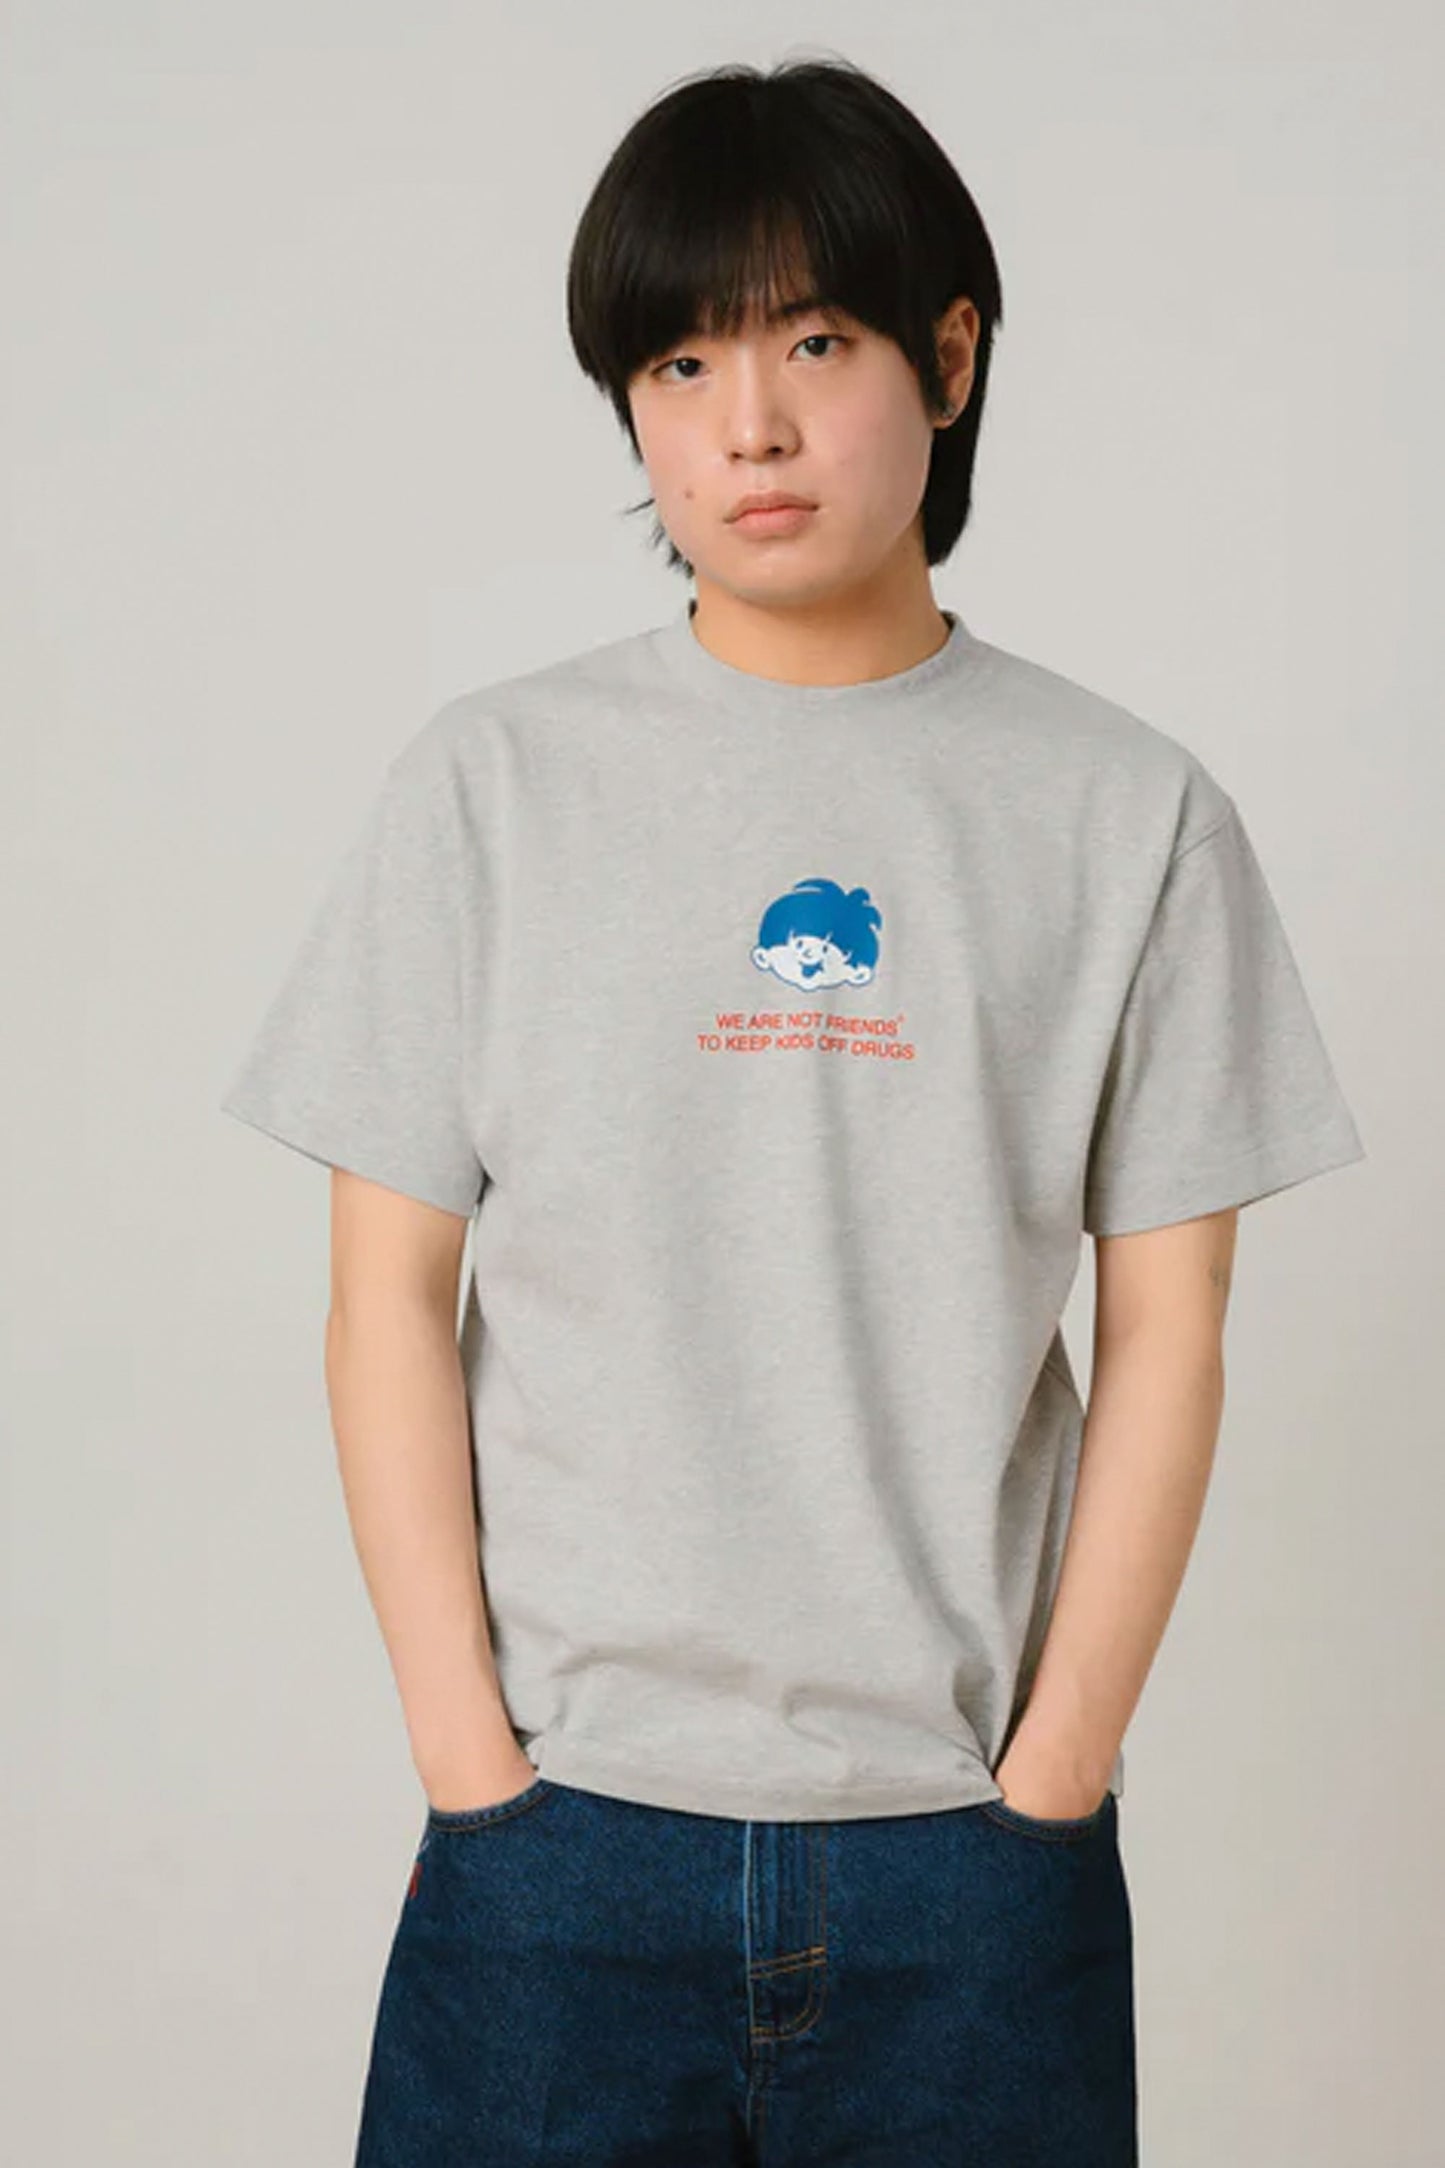 PUKAS-SURF-SHOP-TEE-MAN-WE-ARE-NOT-FRIENDS-KIDS-OFF-DRUGS-GREY